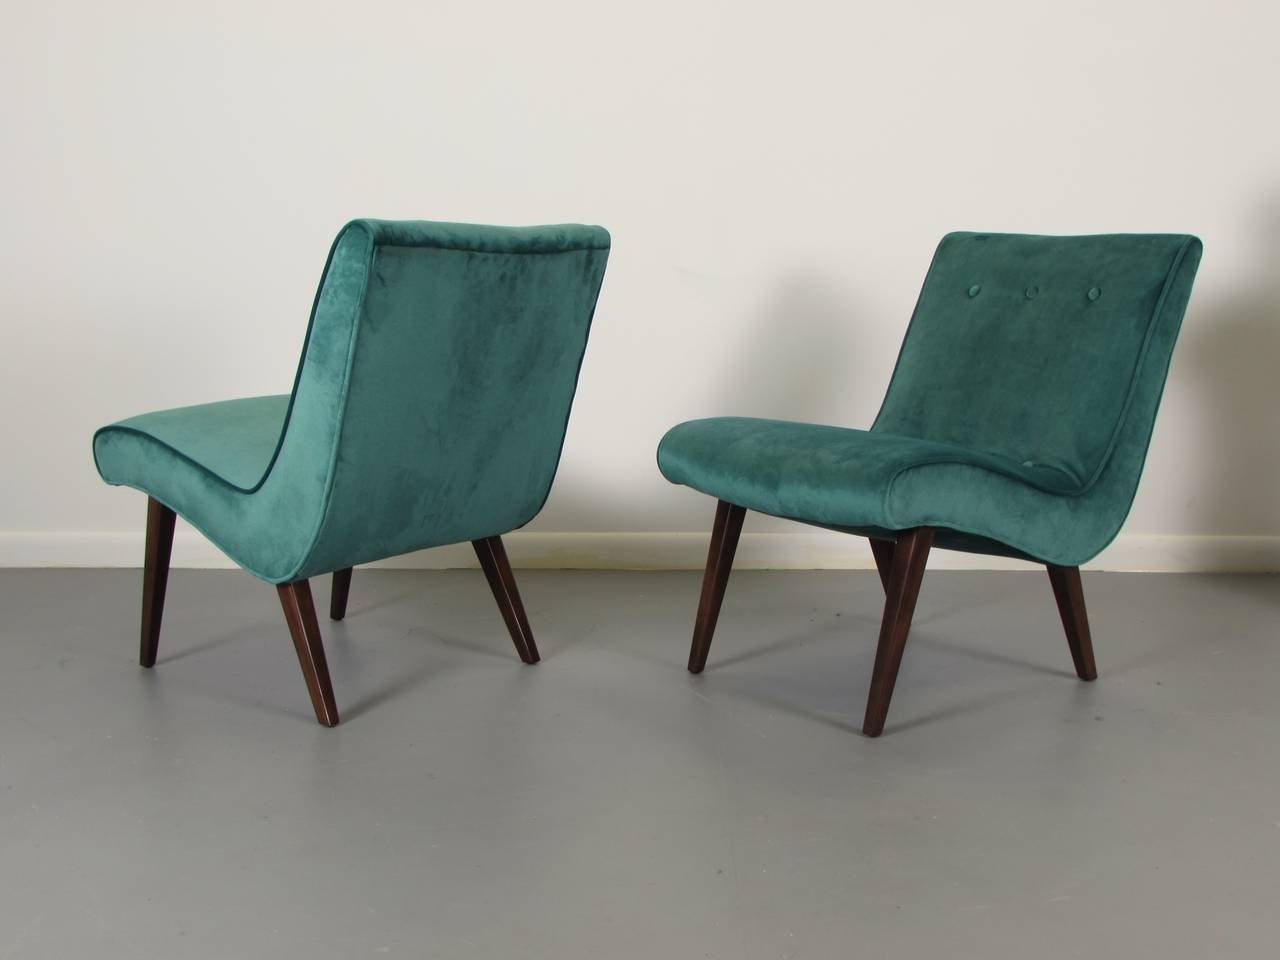 Sculptural scoop slipper chairs in velvet with walnut legs, 1950s. Simple and elegant as well as comfortable! These pieces have been fully restored.

We offer free regular deliveries to NYC and Philadelphia area. Delivery to DC, MD, CT and MA are